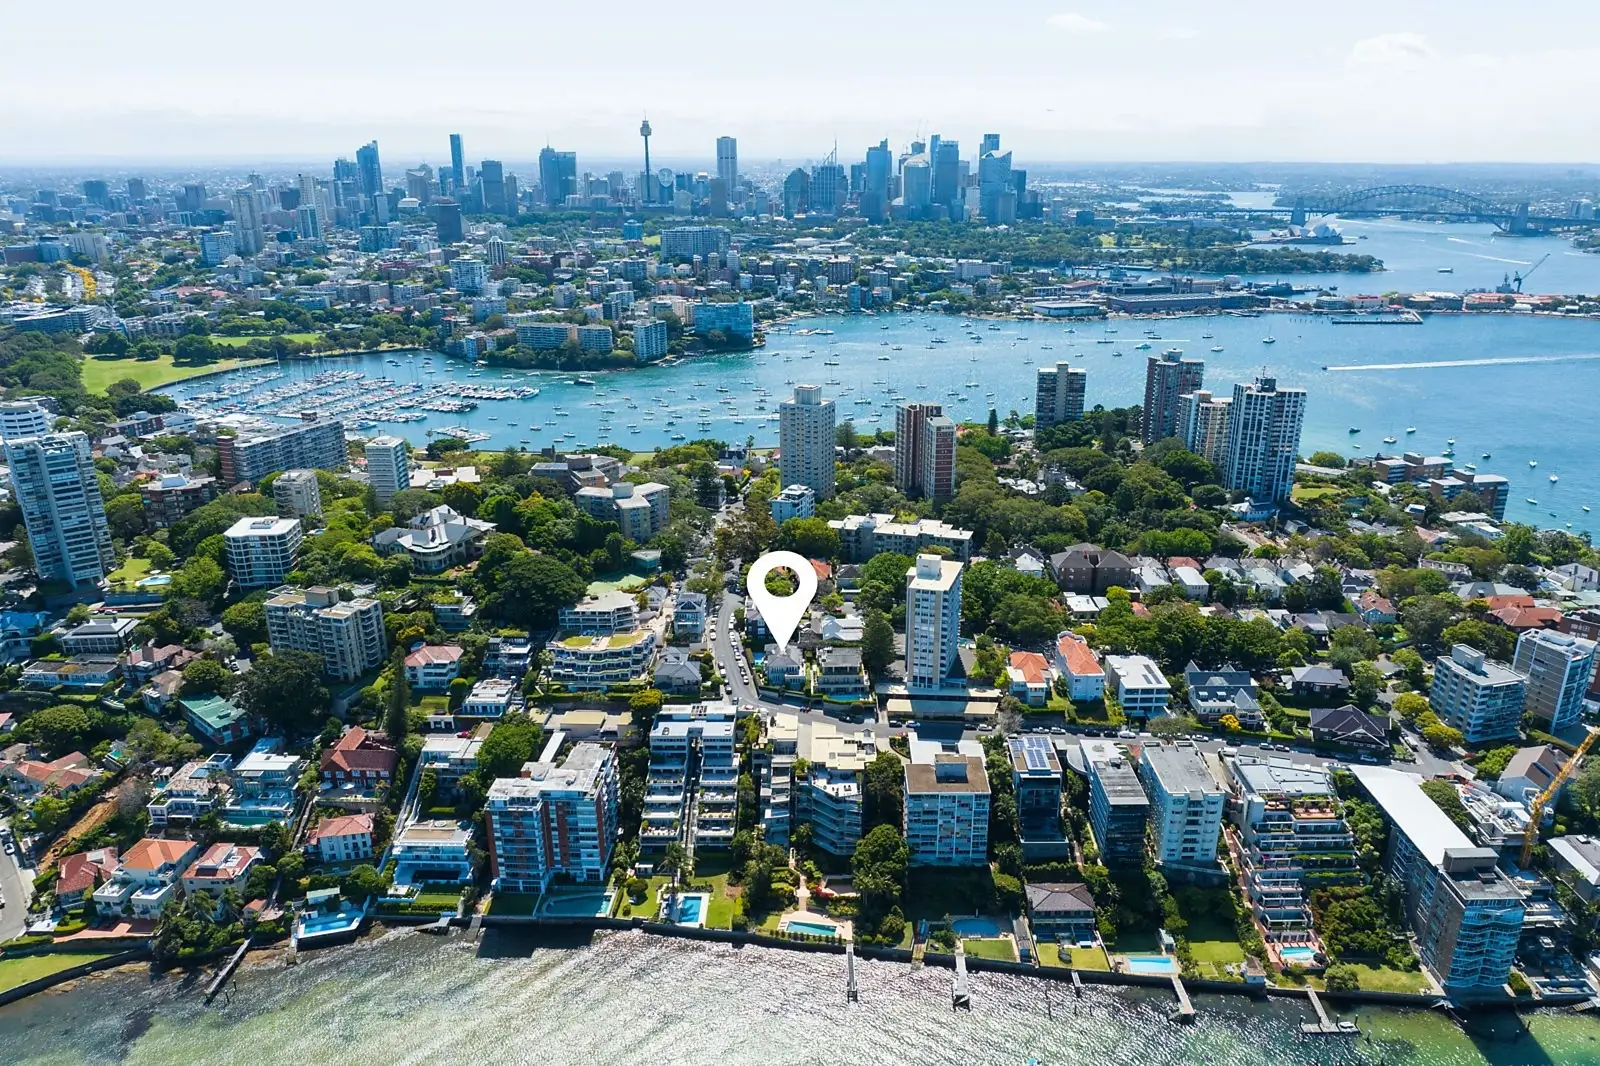 Photo #1: 22 Sutherland Crescent, Darling Point - Sold by Sydney Sotheby's International Realty